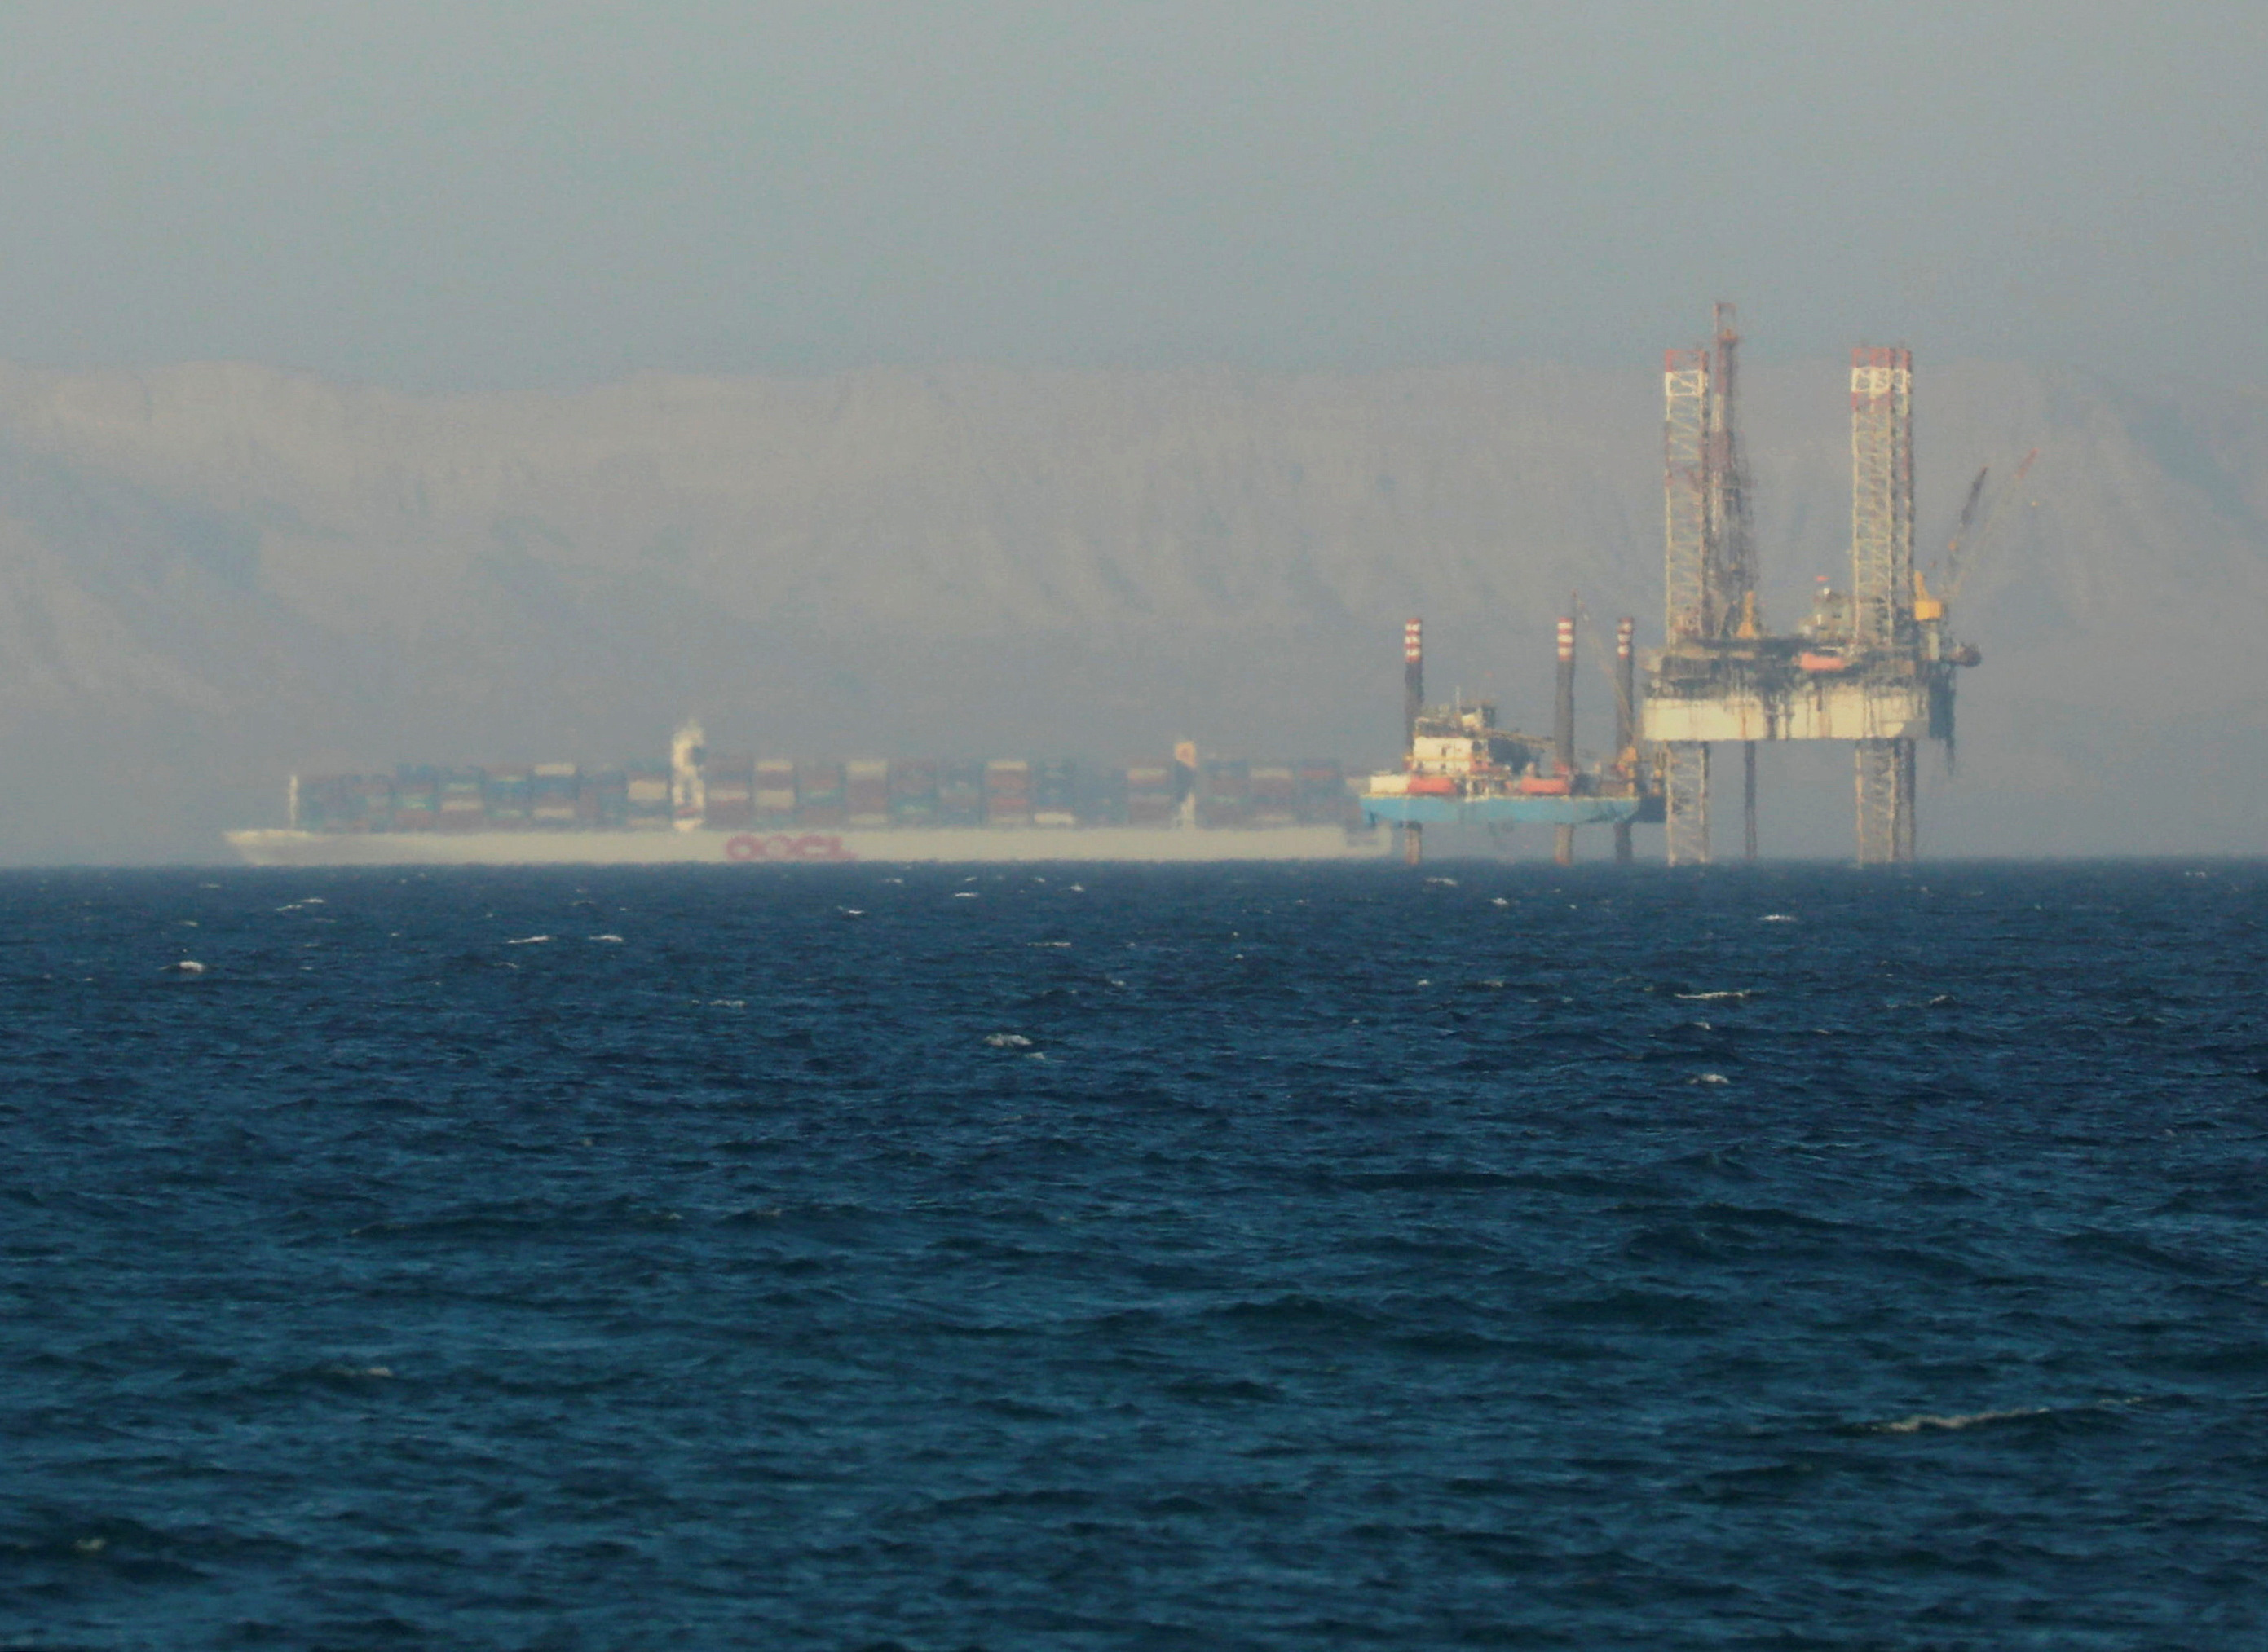 Container ship crosses an oil platform at the Gulf of Suez towards the Red Sea